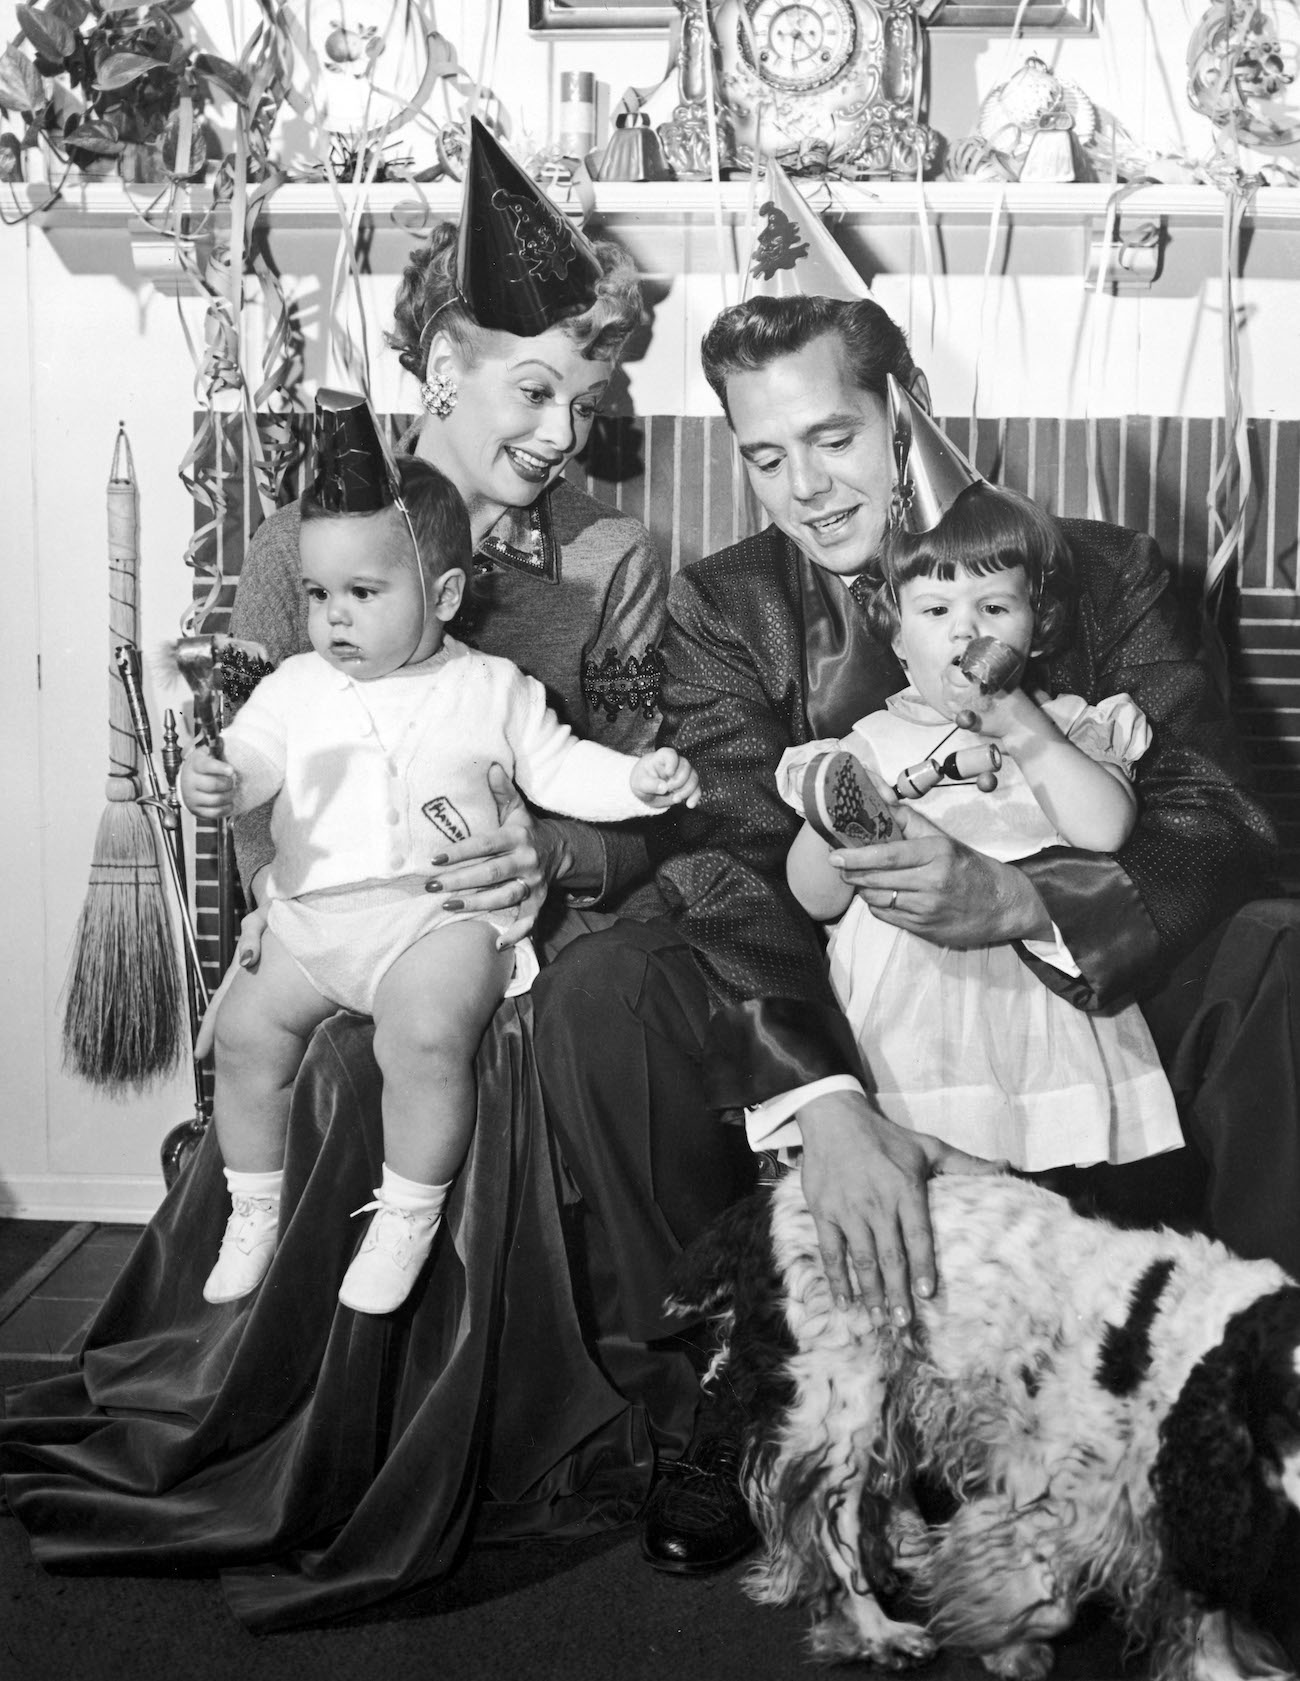 Lucille Ball and Desi Arnaz with their two children, Desi Jr. and Lucie